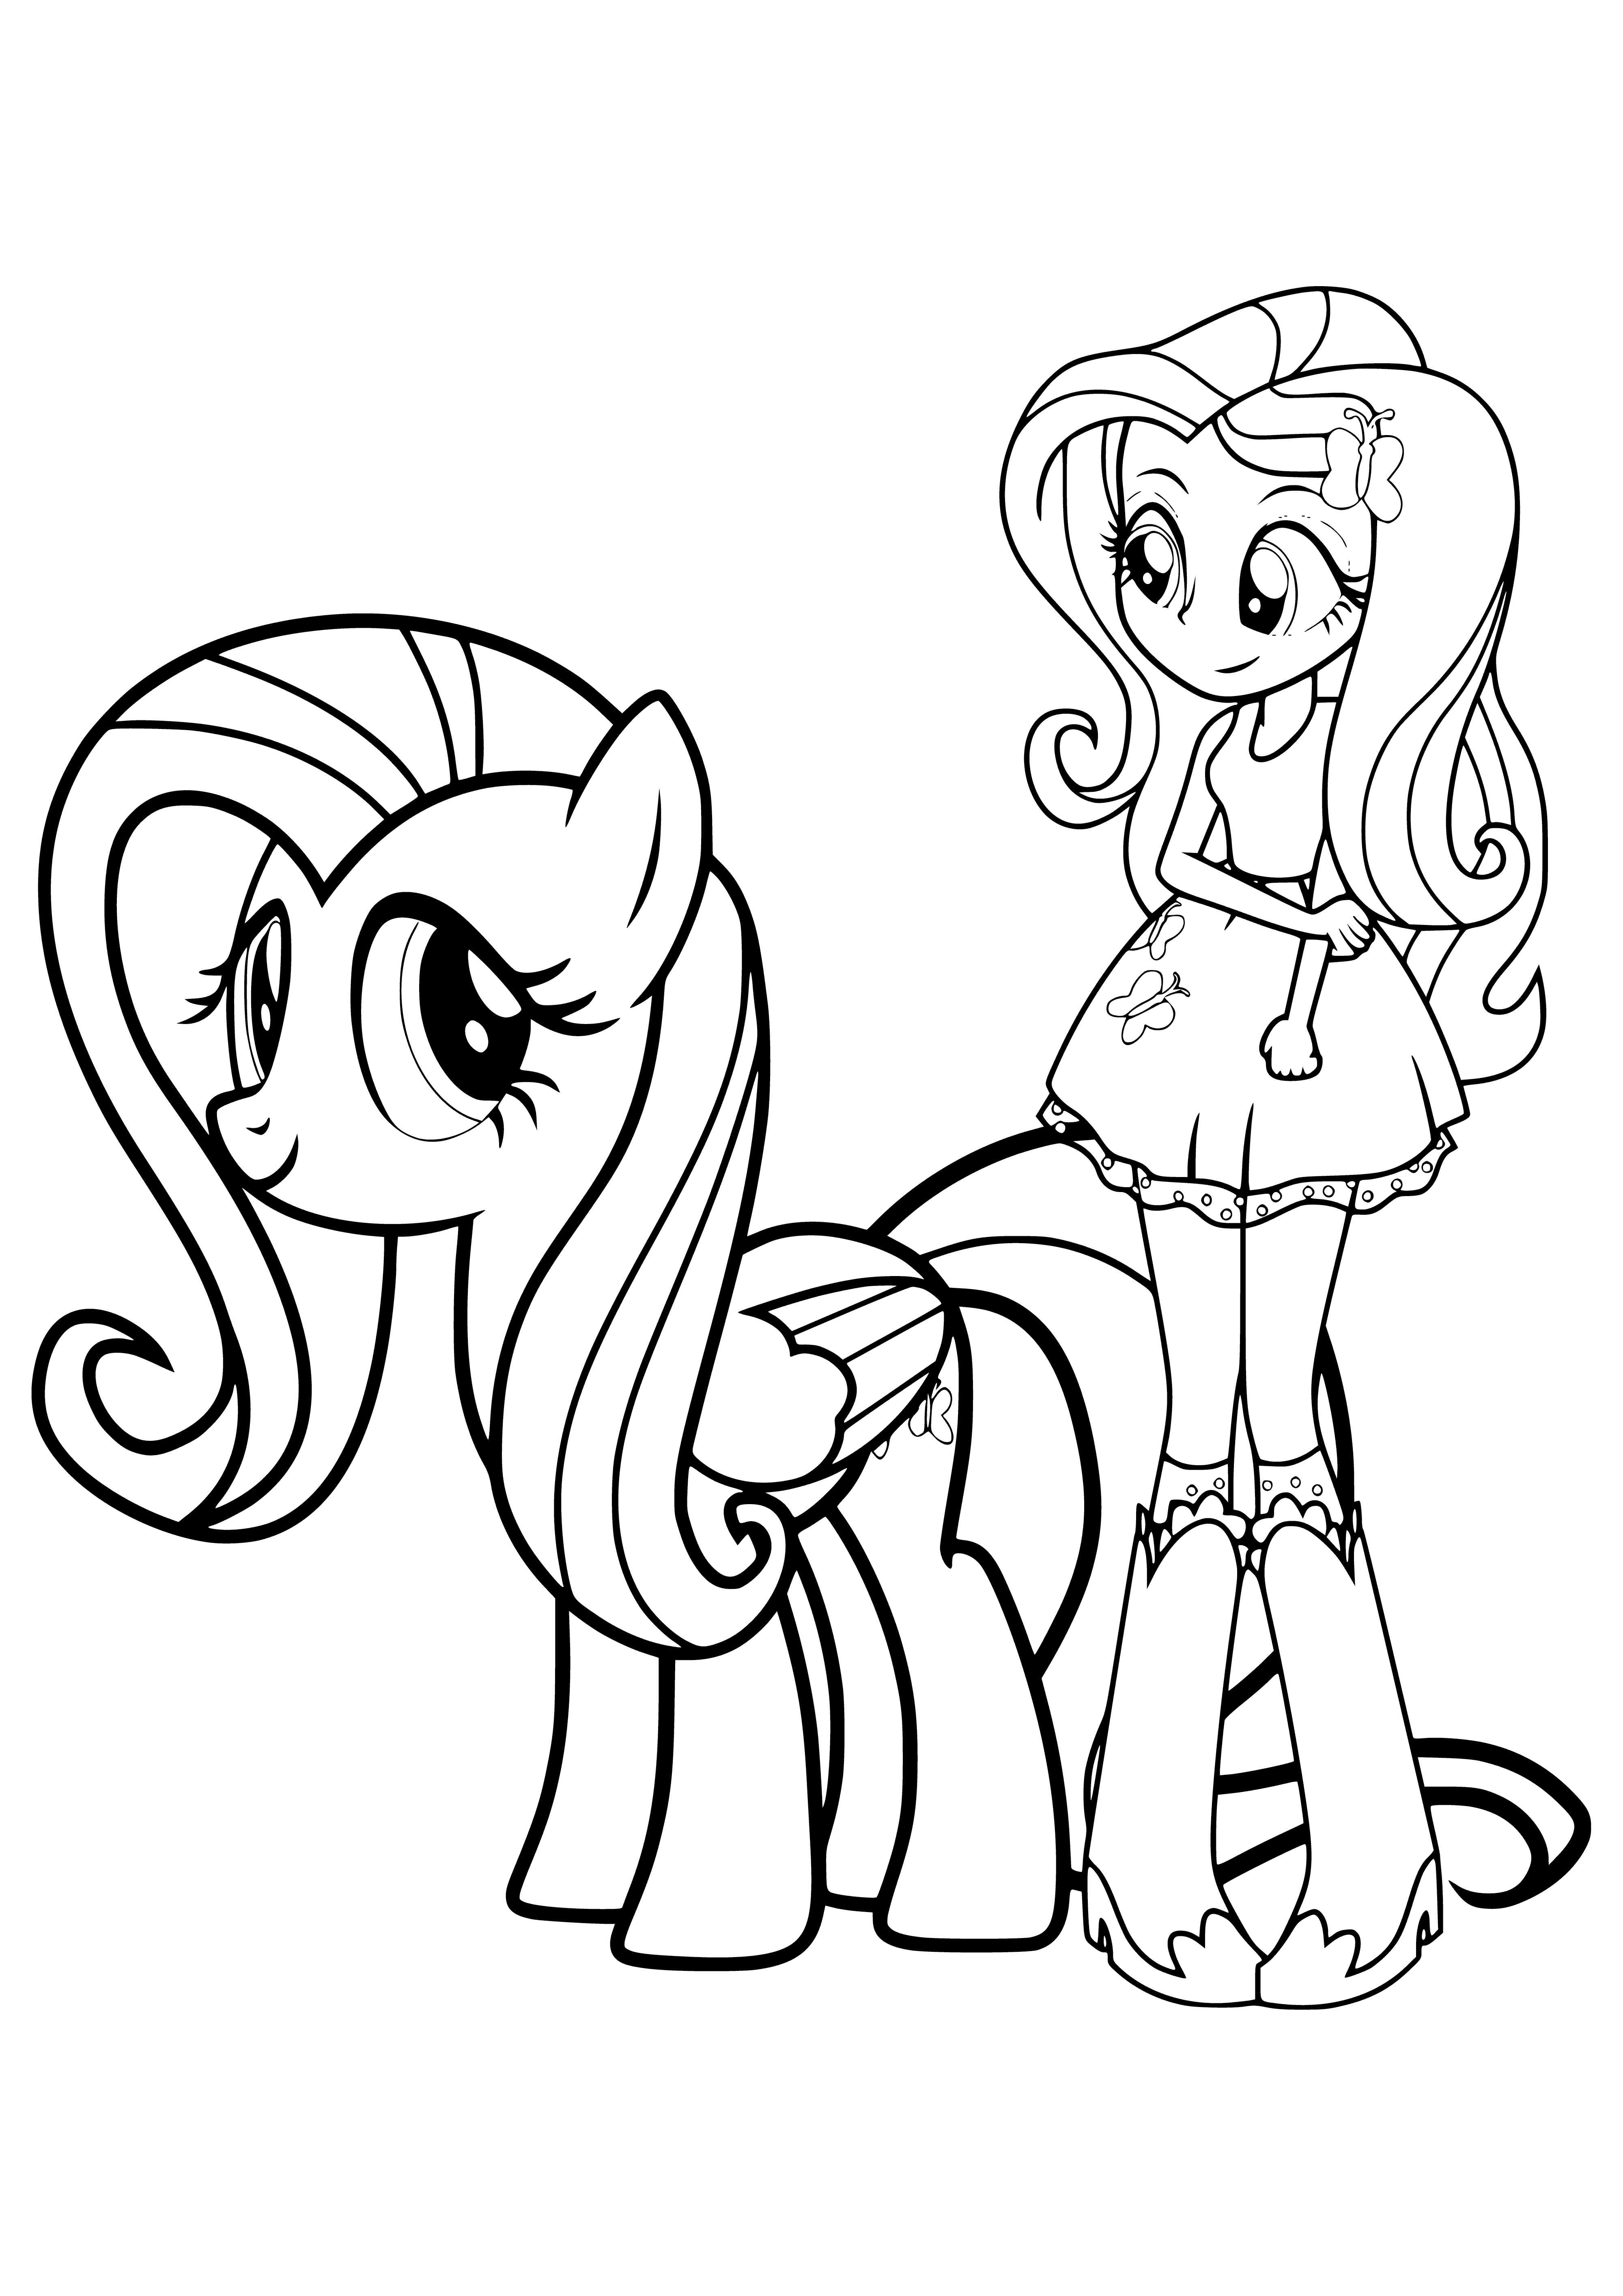 coloring page: Girl Fluttershy has long pink hair, light pink outfit & white shoes. Her pony counterpart has a light pink mane, tail, blue eyes & yellow-pink butterfly. Both Fluttershy's share a gentle, caring nature. #Fluttershy #girlpony #MyLittlePony